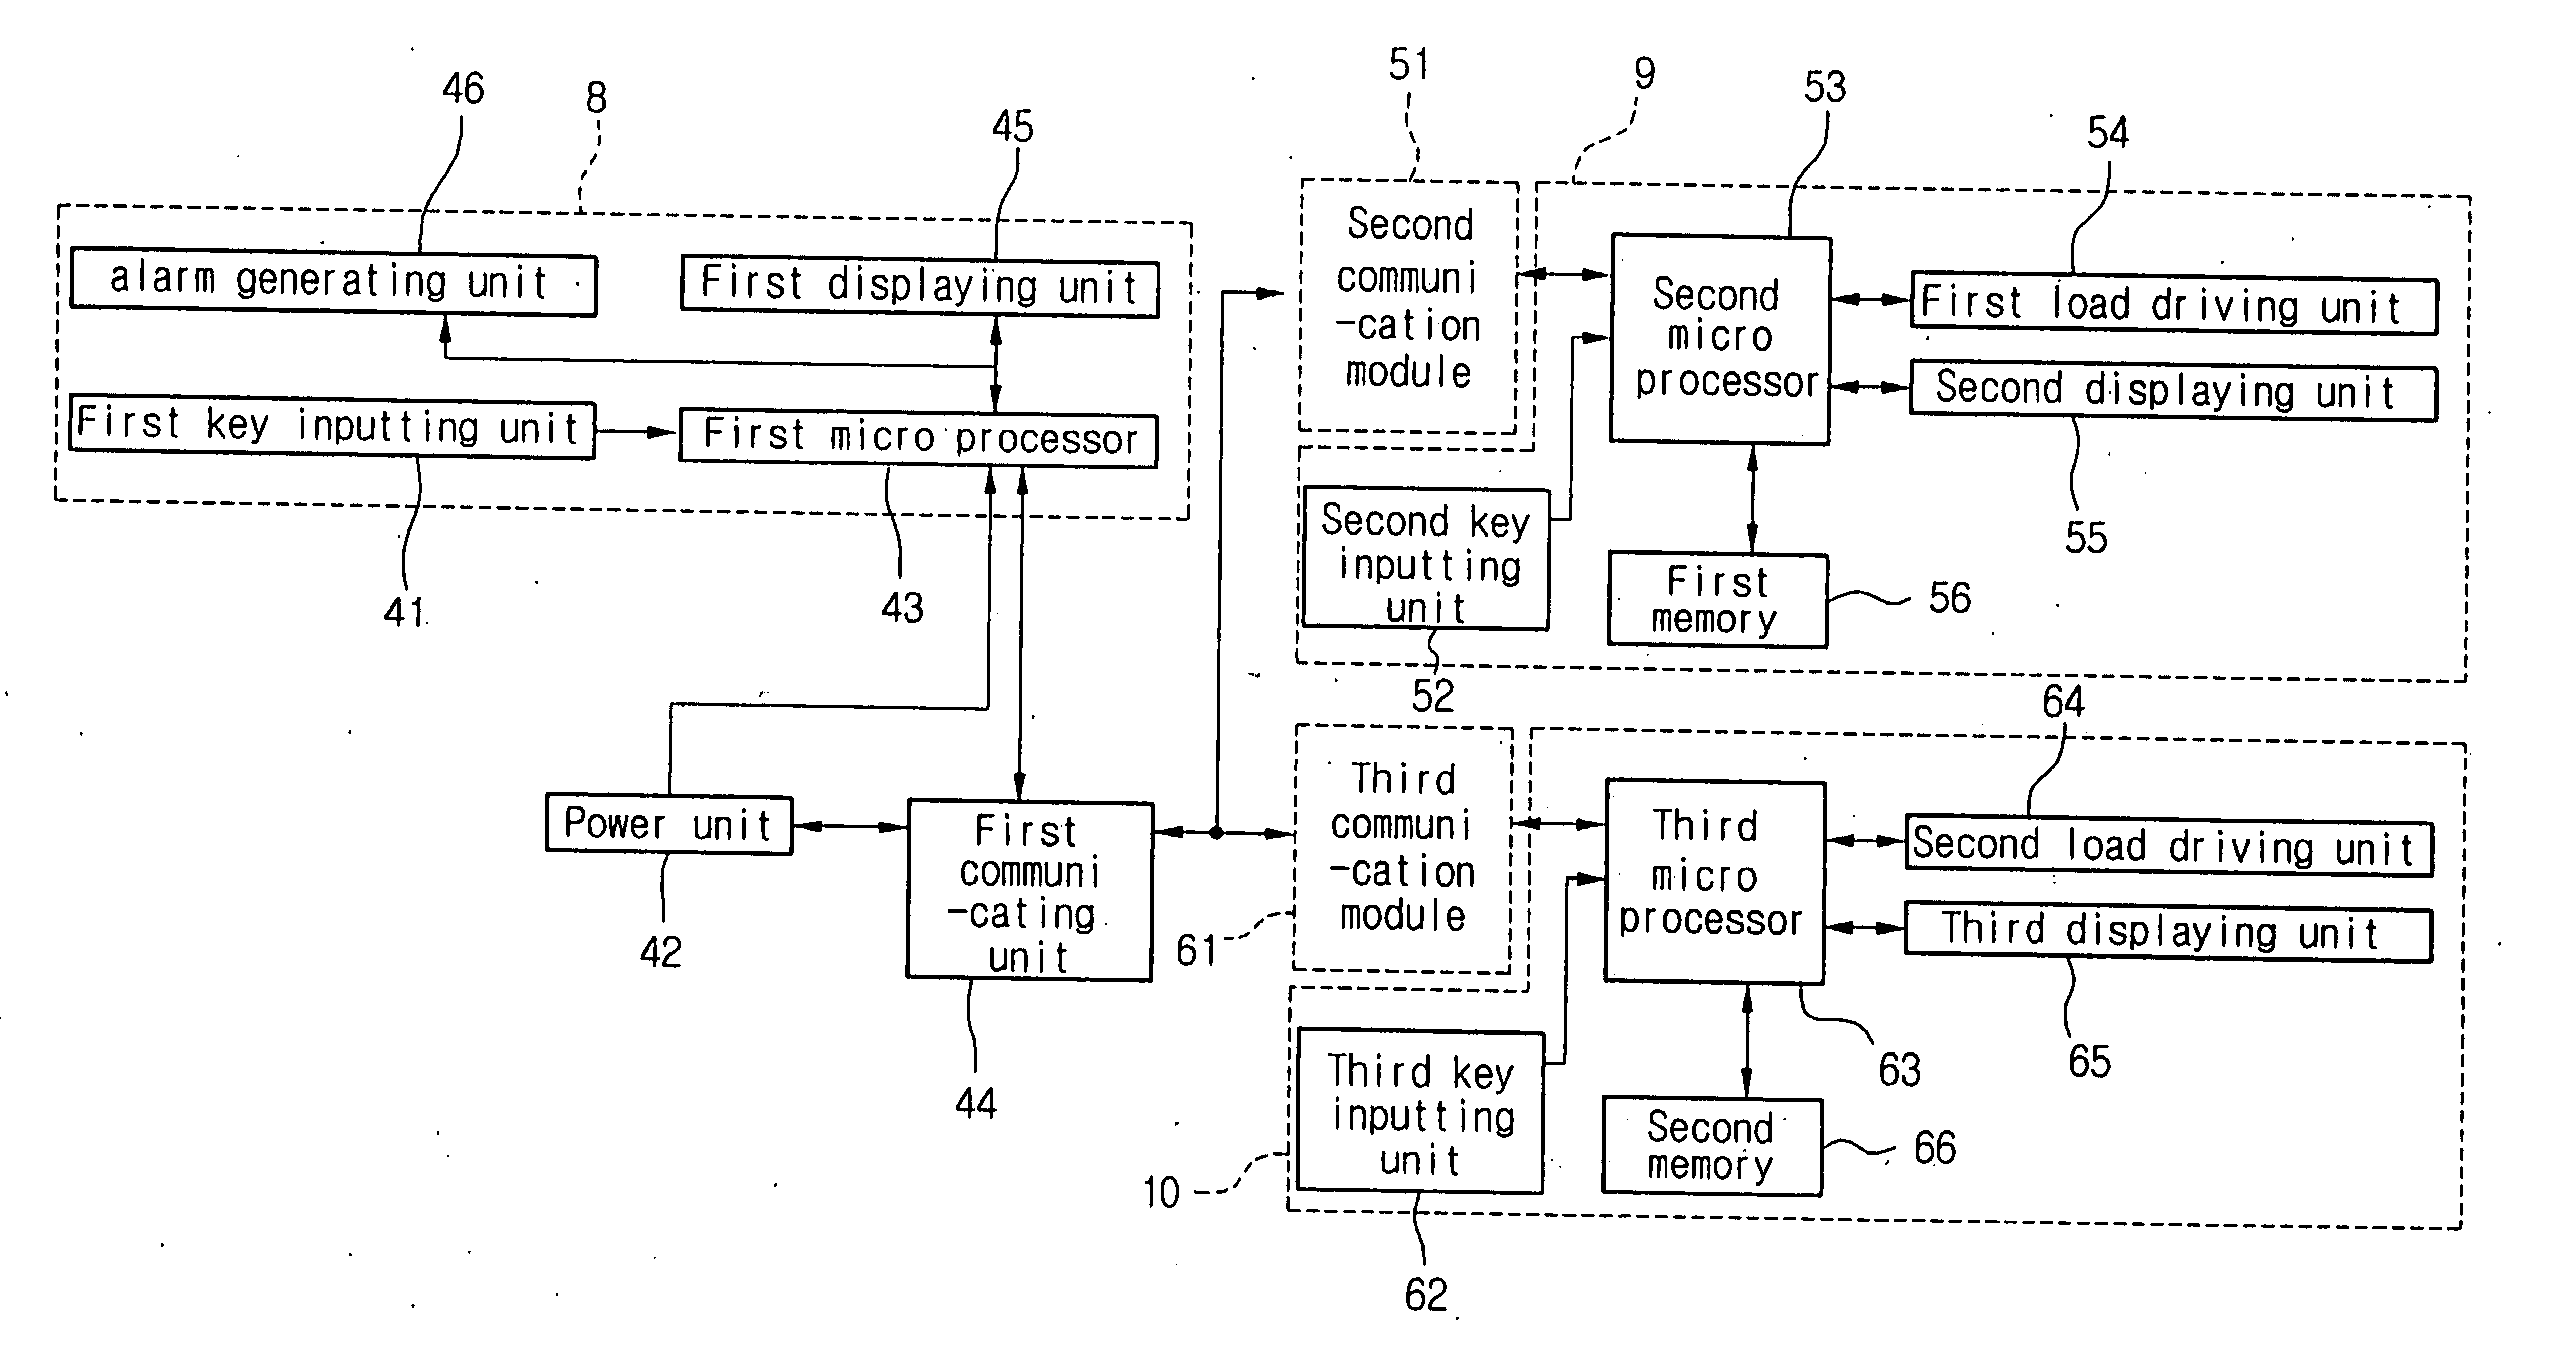 Monitoring system and method for home appliance placed within certain distance